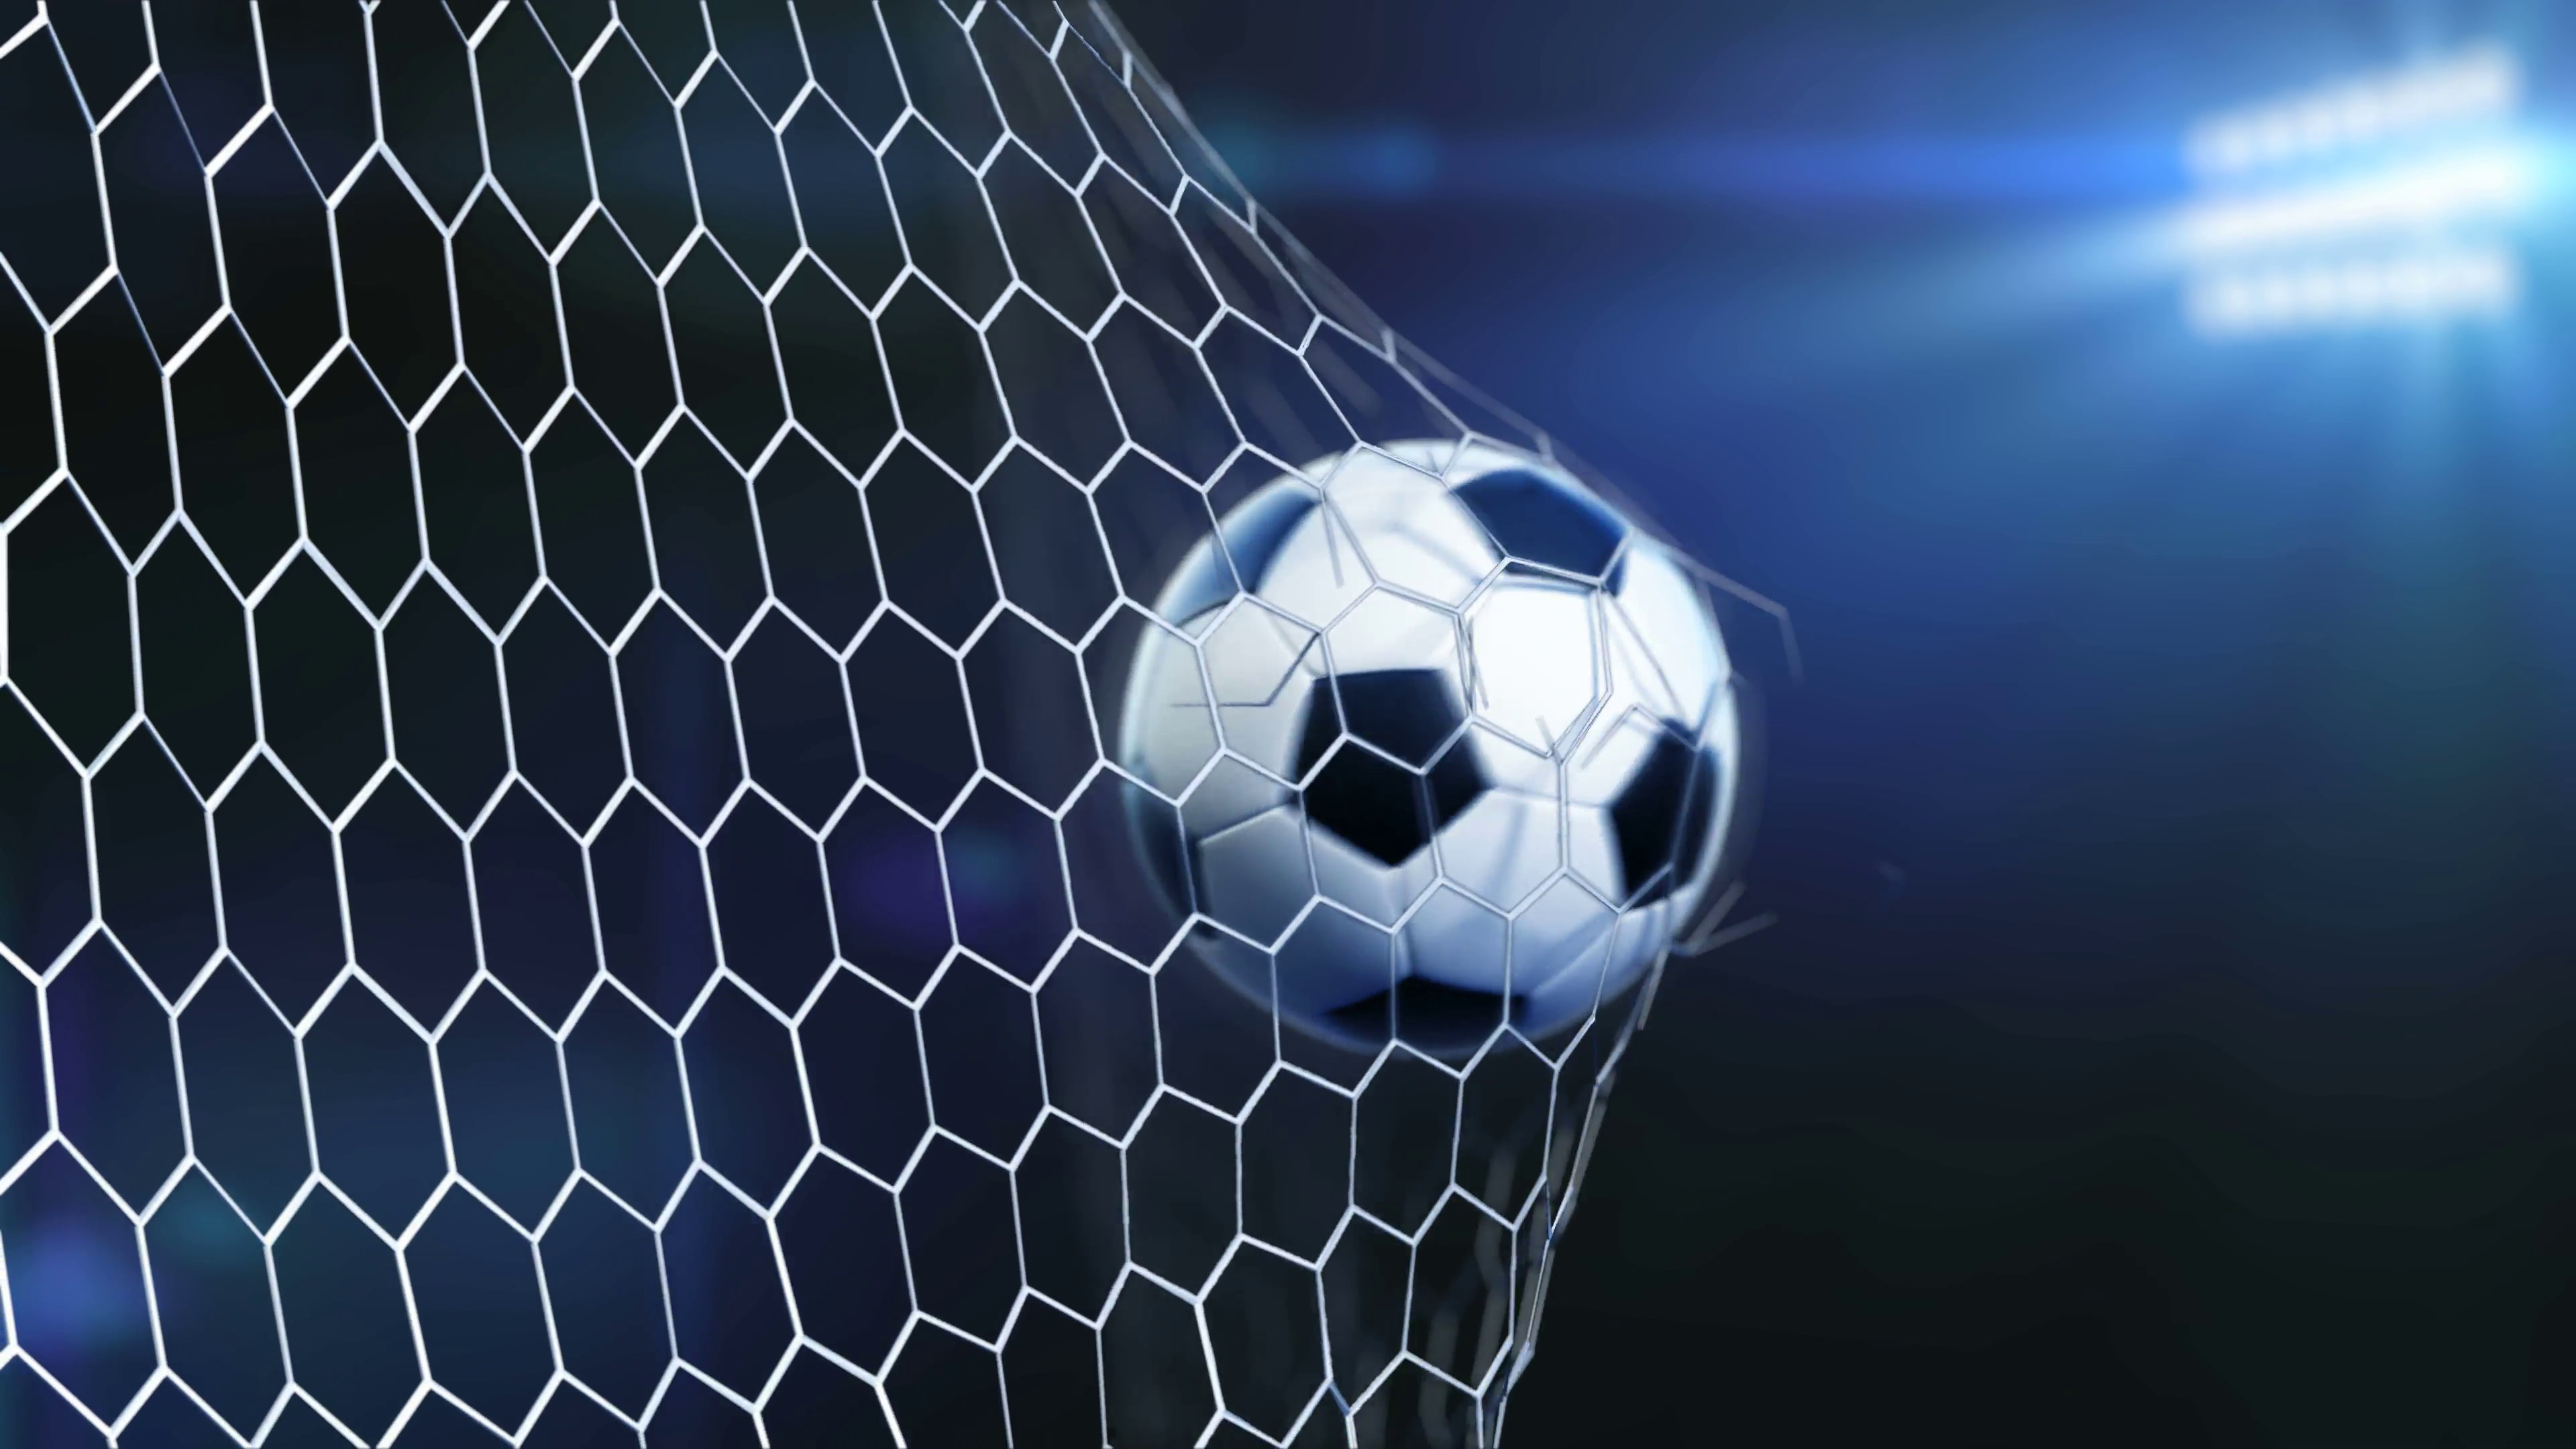 3840x2160 4K slow motion 3d animation of soccer ball flying and tearing goal net on  dark background